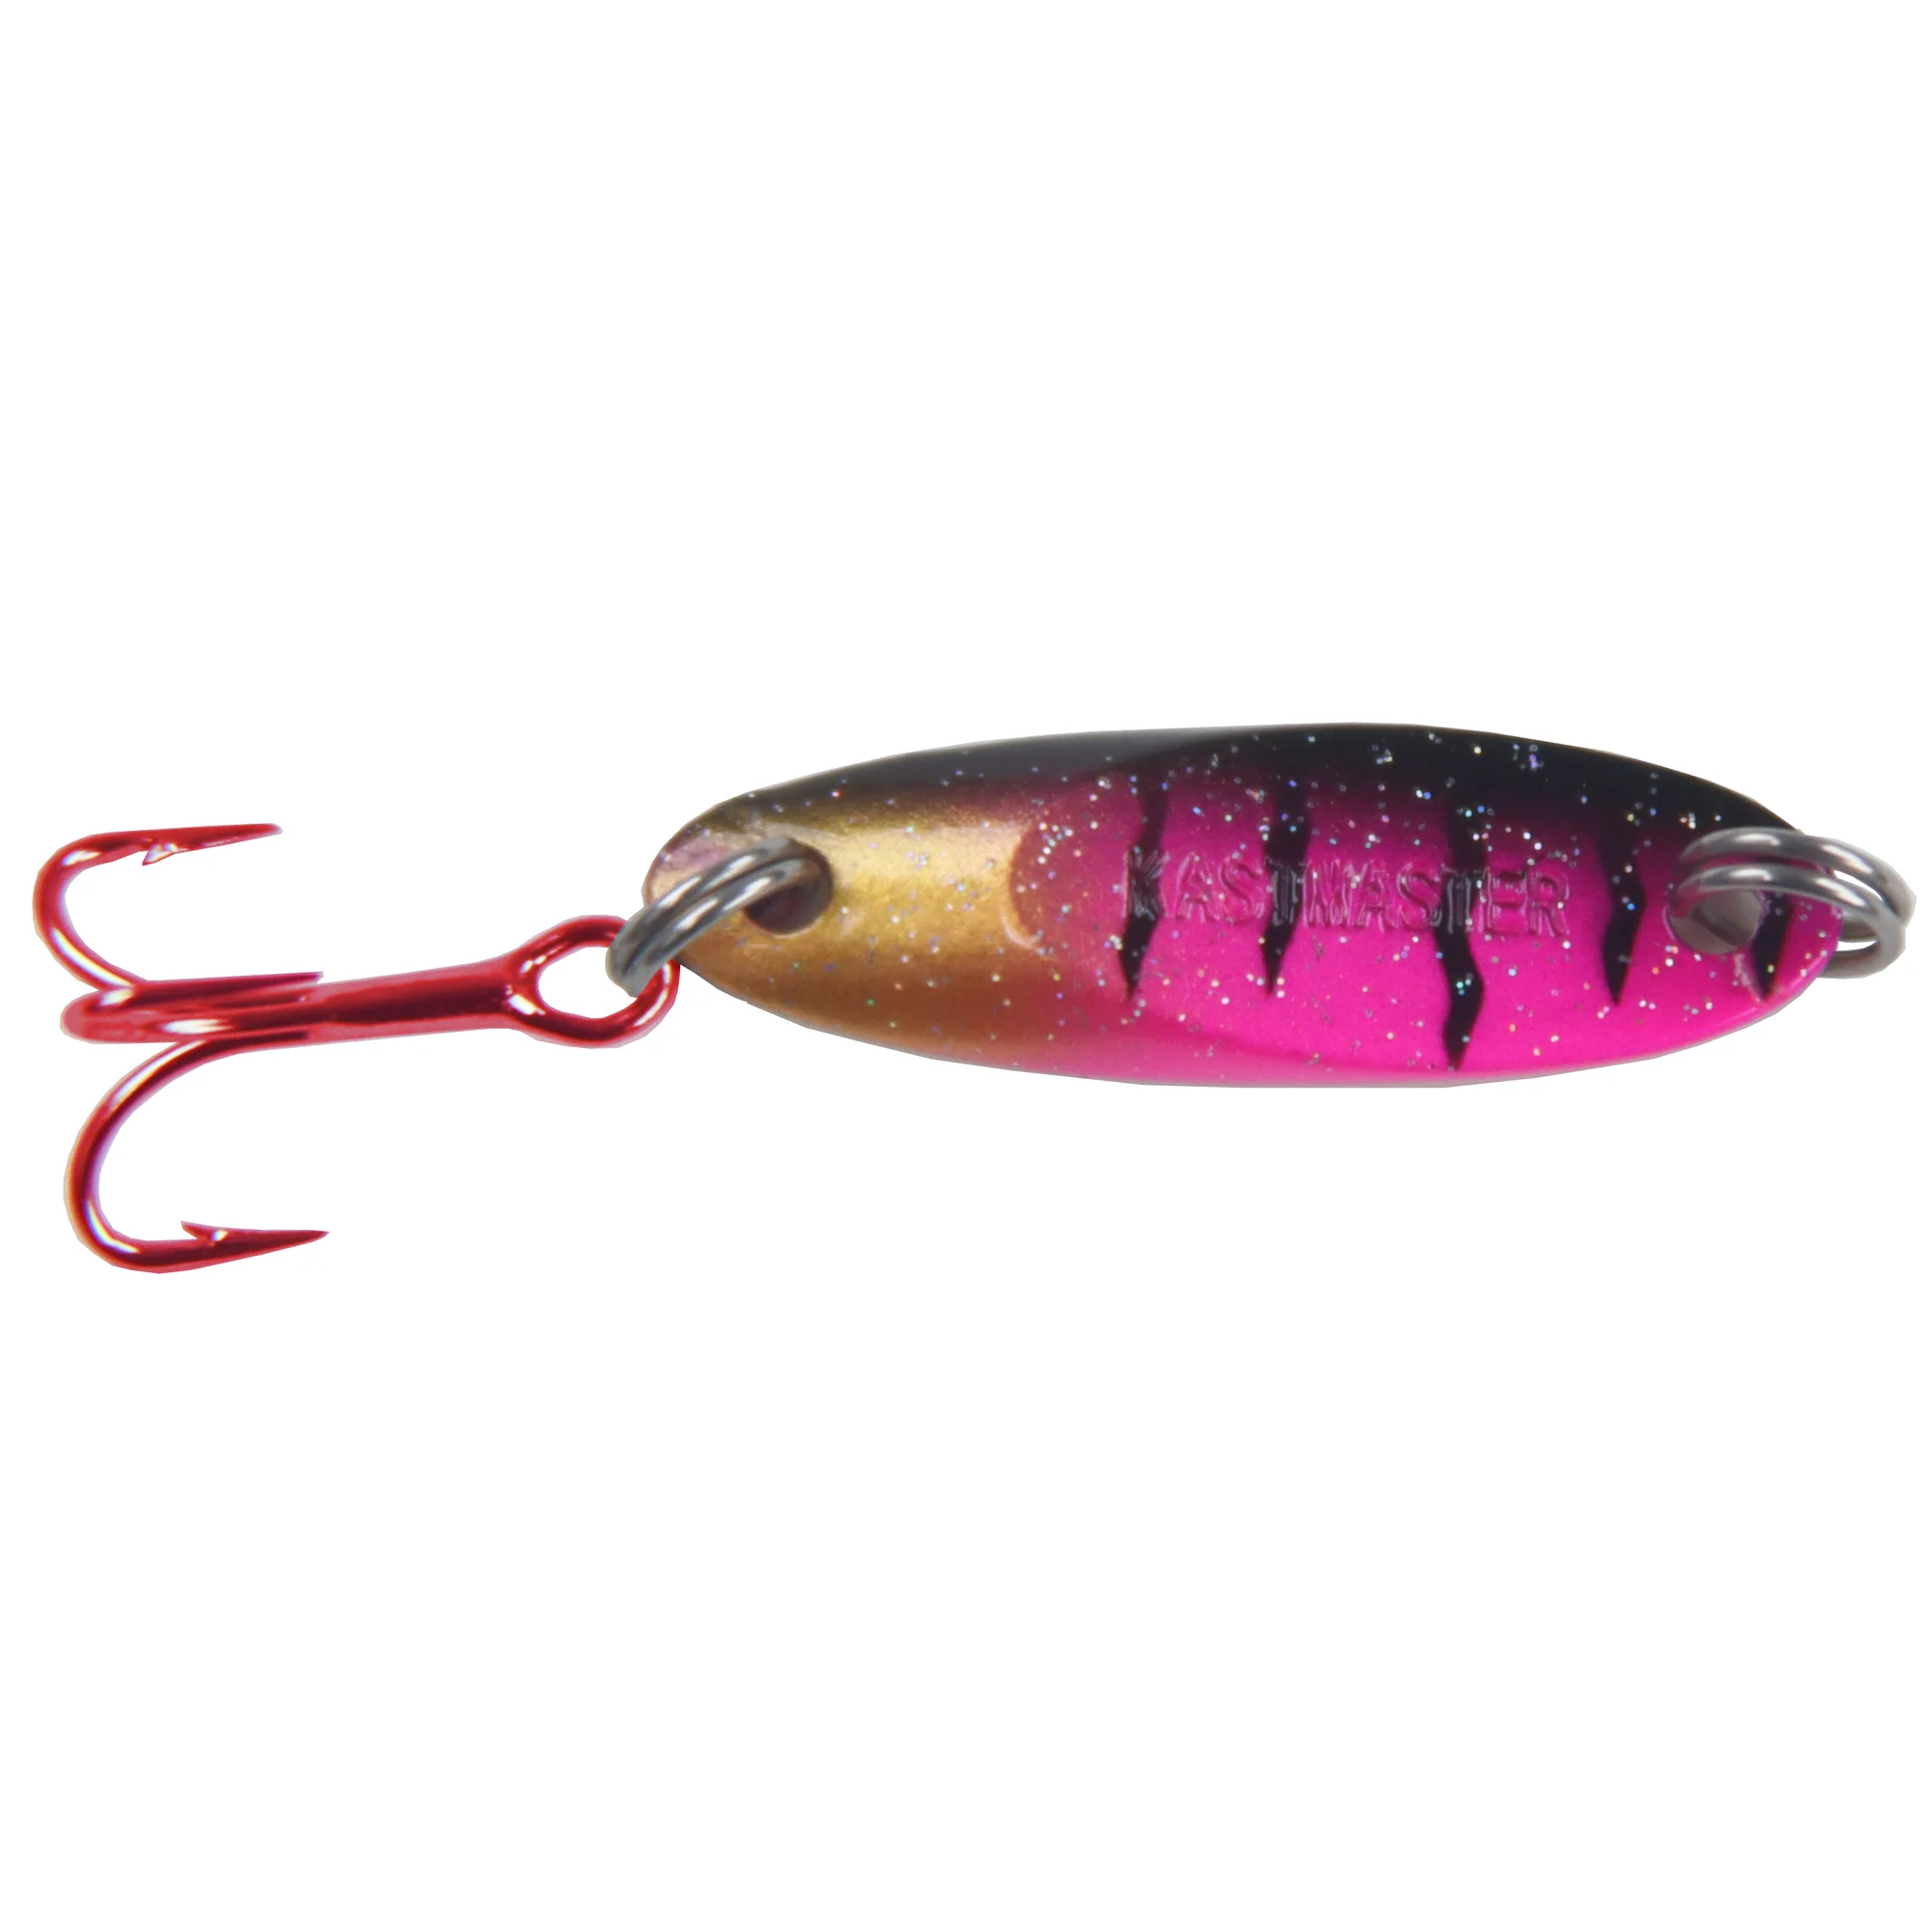 Acme Kastmaster DR Tungsten - Dick Smith's Live Bait & Tackle